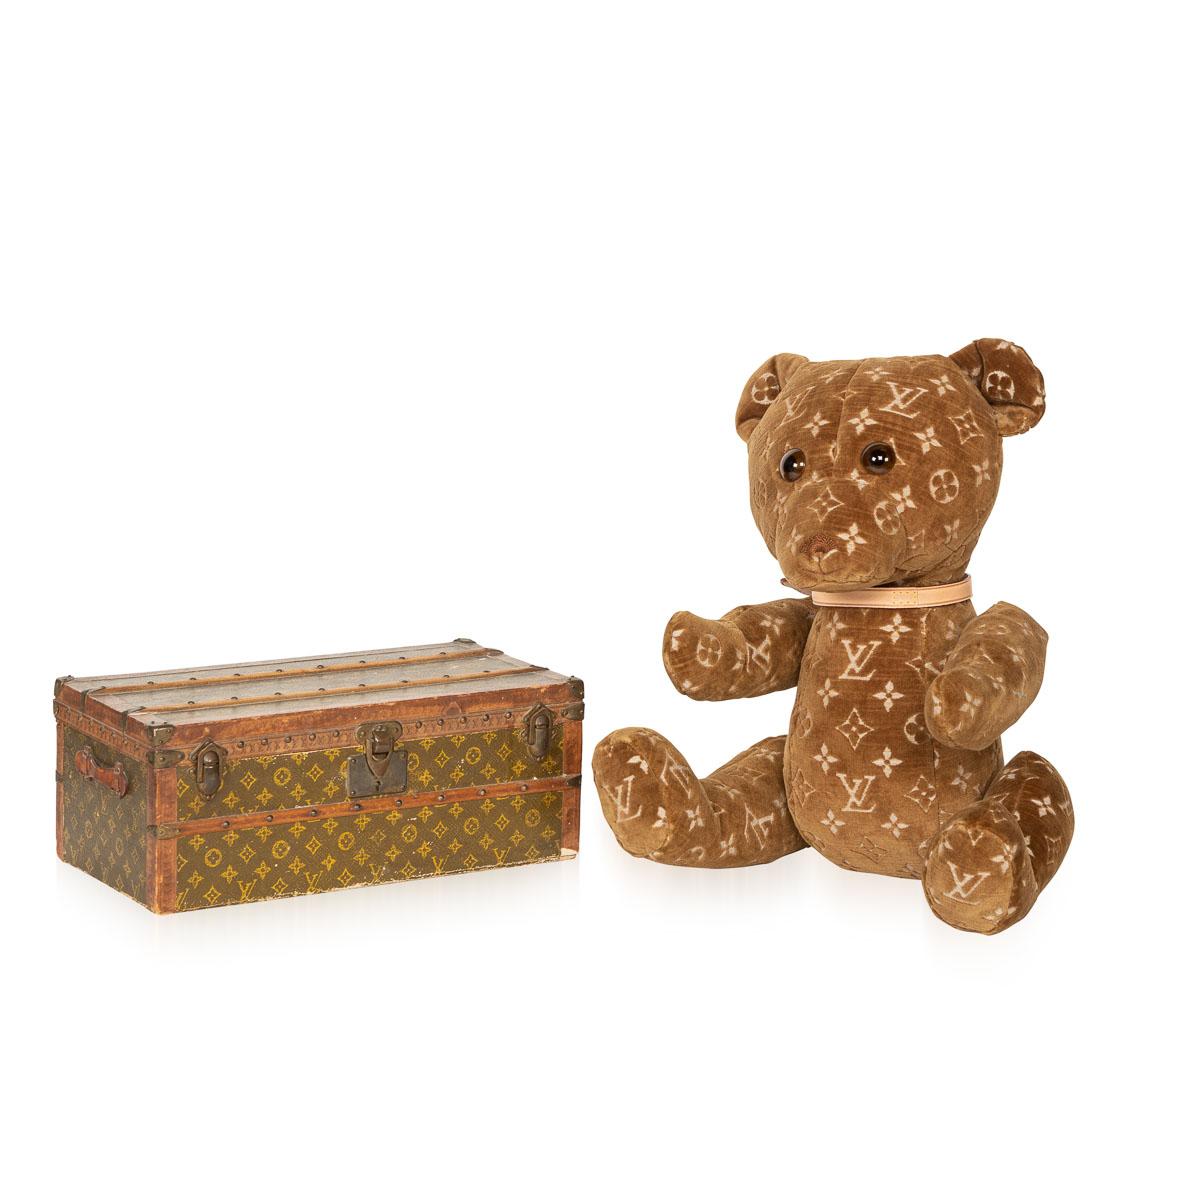 Louis Vuitton For UNICEF DouDou Mini Teddy Bear Watercolors Print NEW With  Box